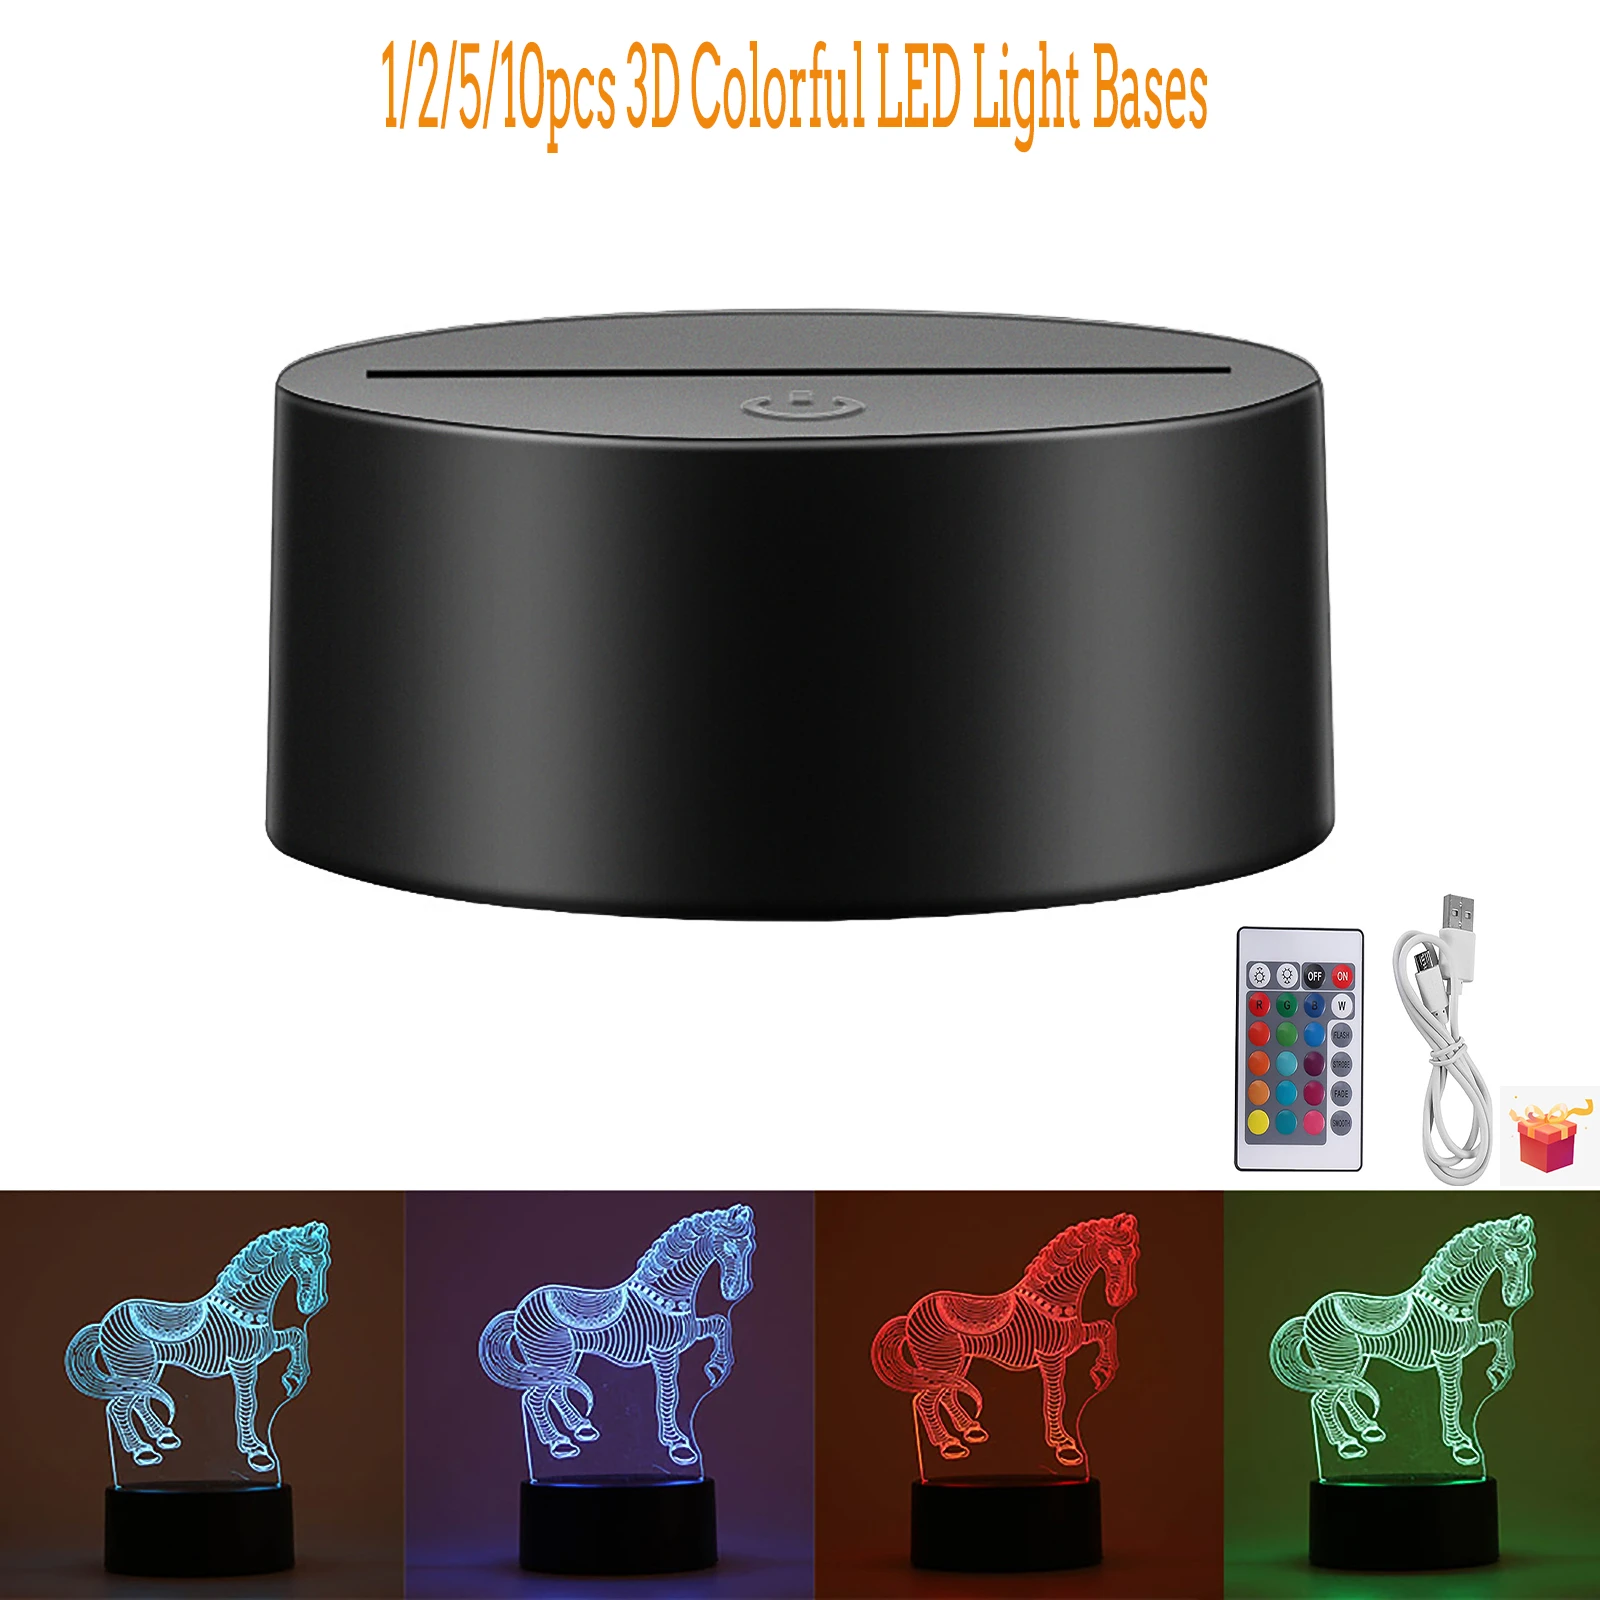 1/2/5/10PC USB Cable Touch 3D LED Light Holder Lamp Base Night Light Replacement 7 Color Colorful Light Bases Table Decor Holder